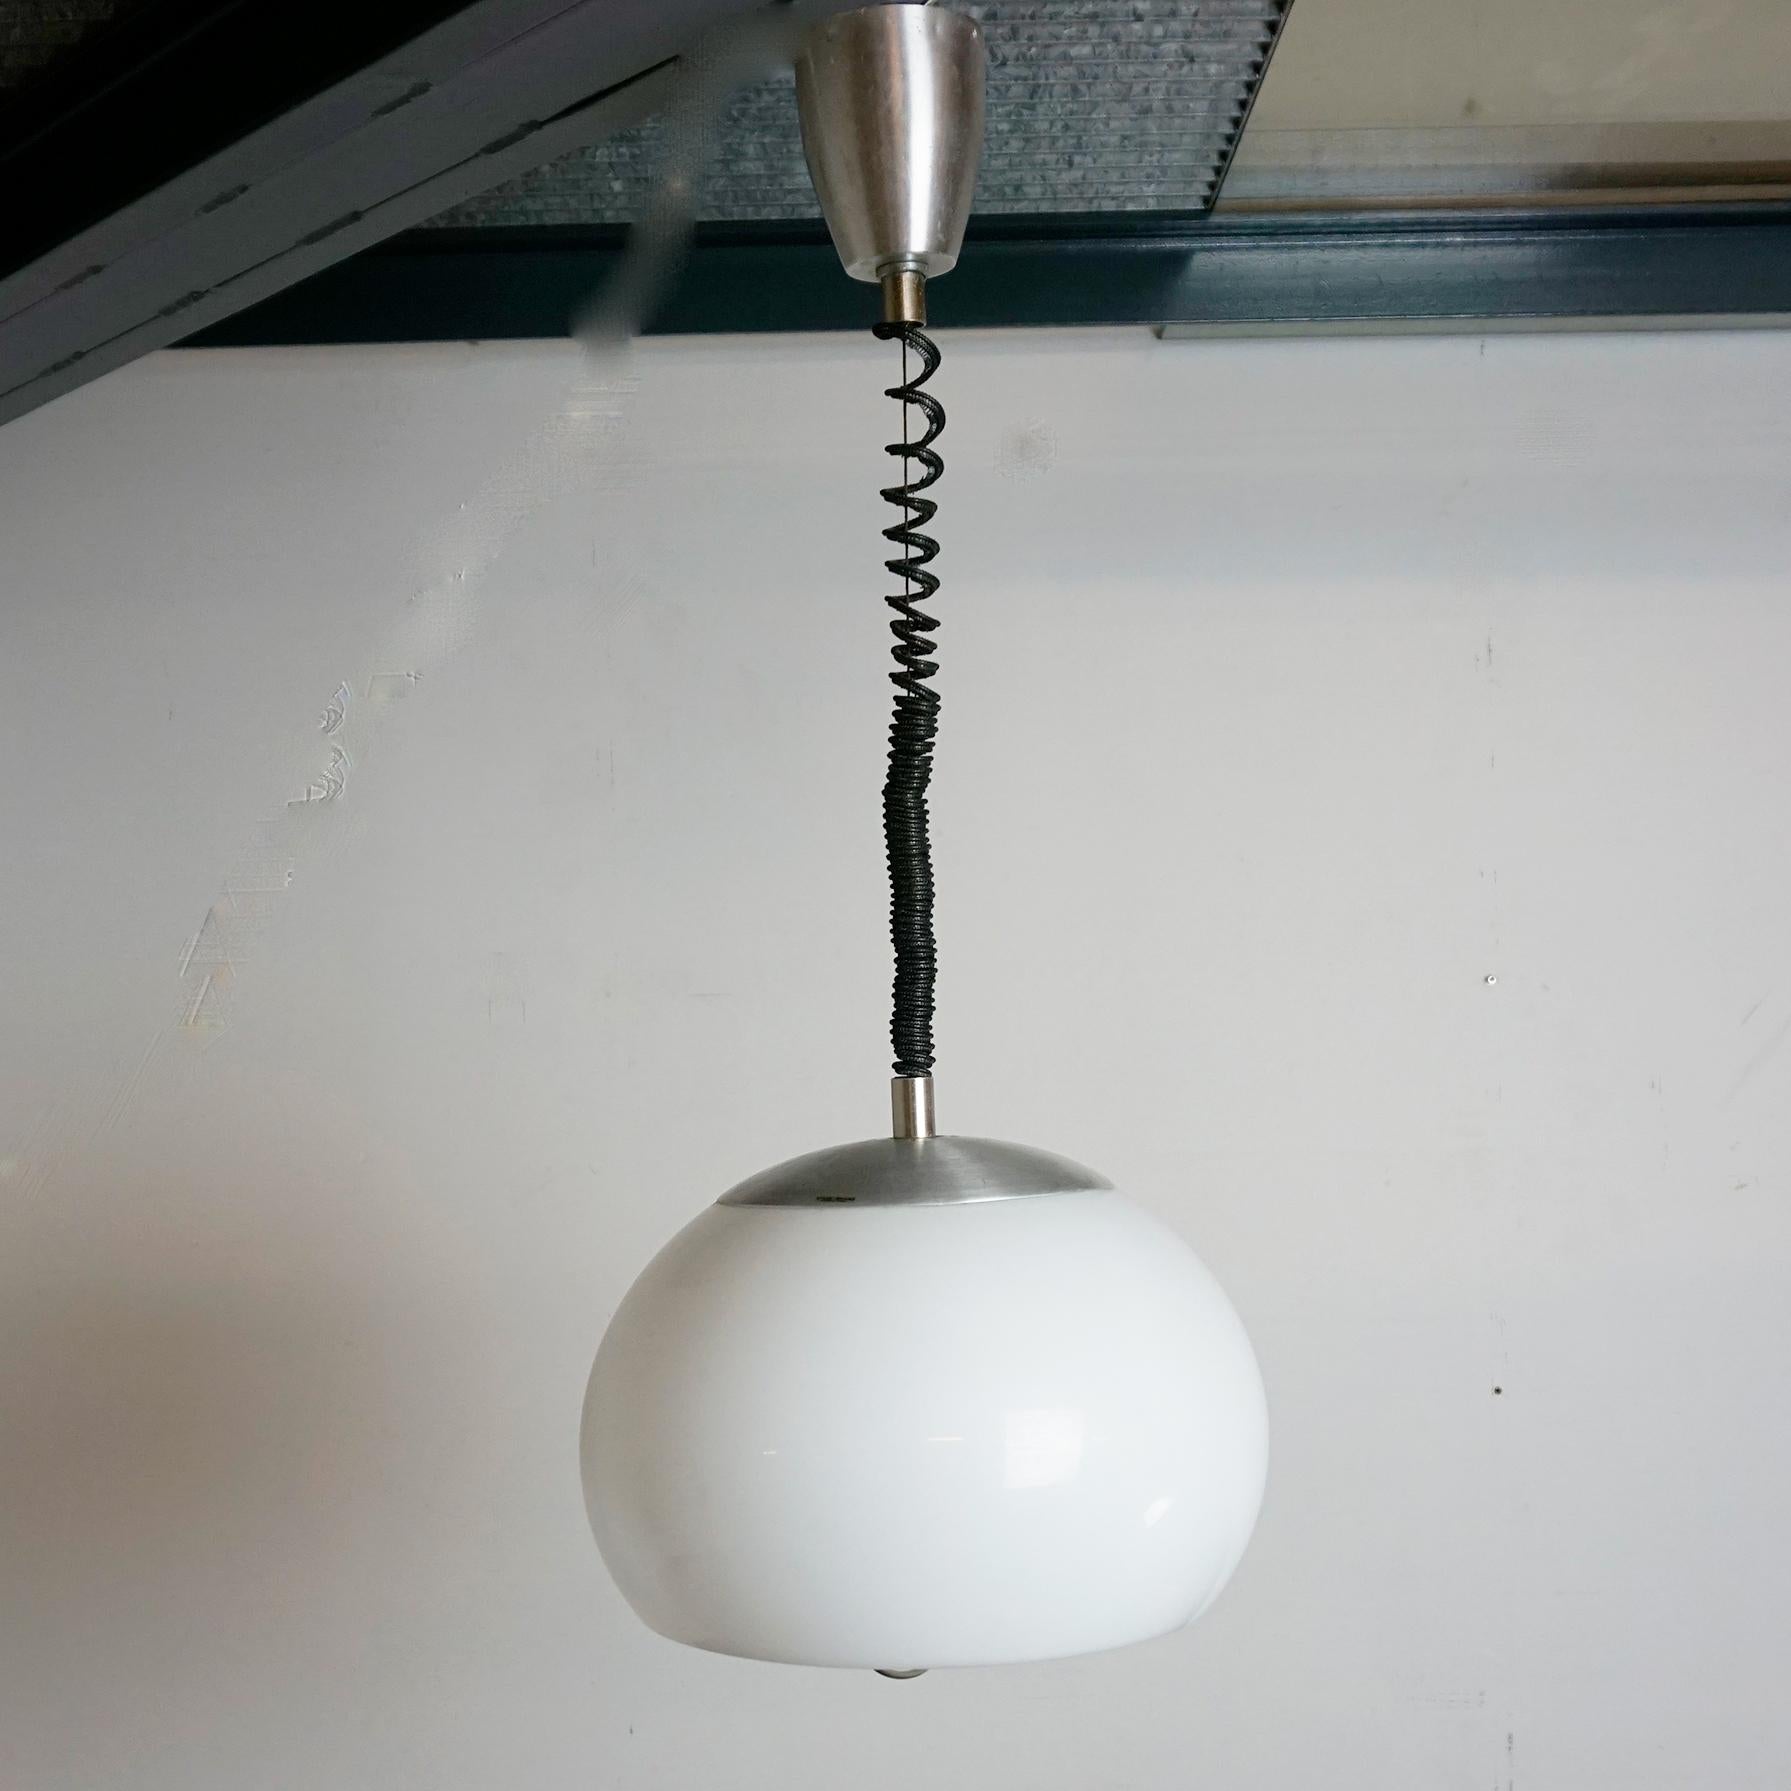 Wonderful midcentury modern white perspex and aluminium pendant lamp. This fantastic piece was designed by Stilux in Italy during the 1960s.
It features a spiral telephone cord style suspension cable, an On/Off switch on top of the globe and a E27